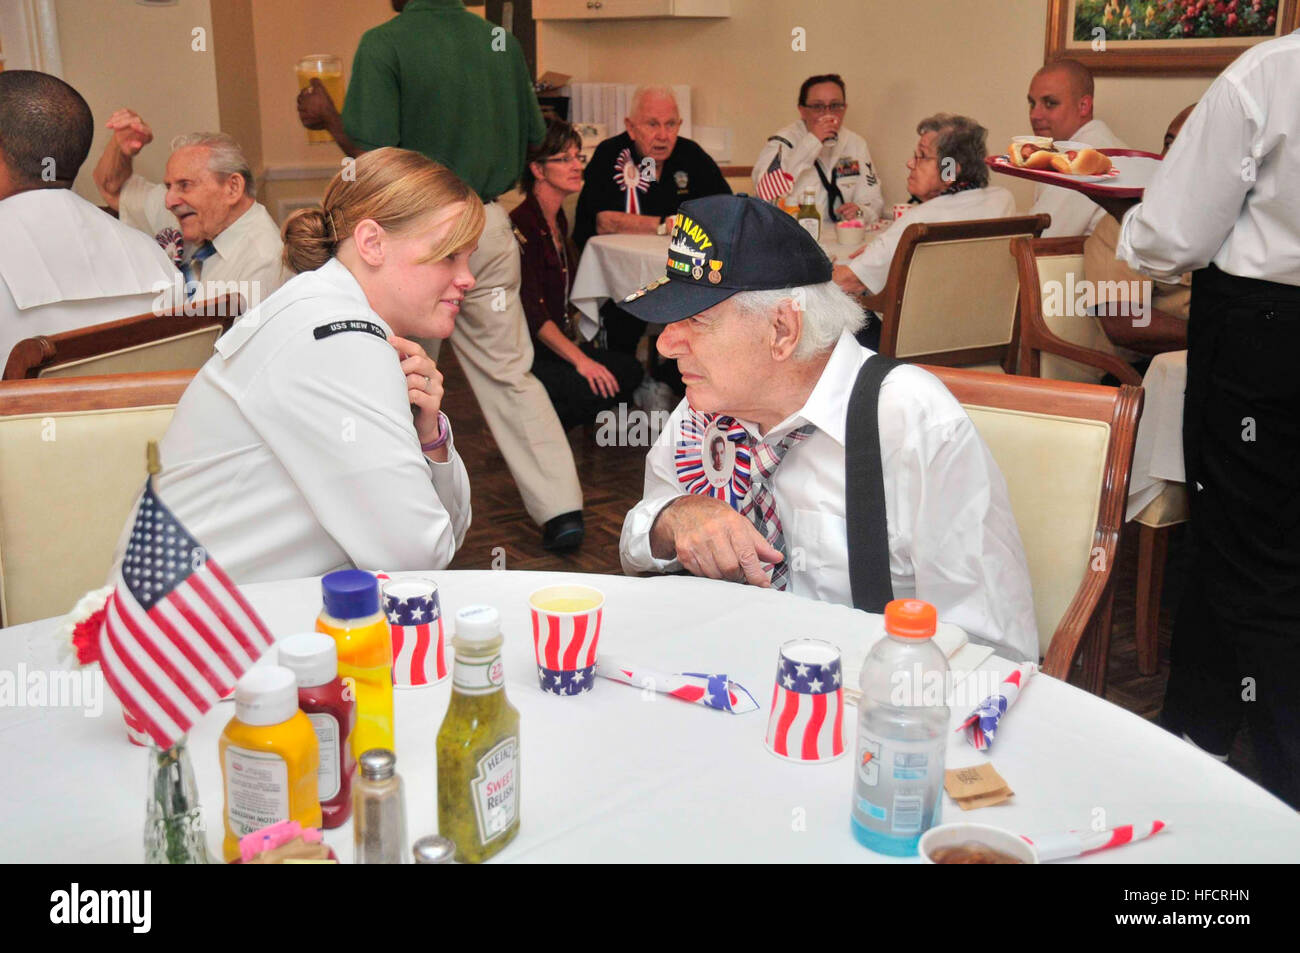 Sailors from the amphibious transport dock ship USS New York (LPD 21) interact with veterans during a Salute to Veterans luncheon as part of Fleet Week Port Everglades. This is the 24th annual Fleet Week in Port Everglades, South Florida's annual celebration of the maritime services. (U.S. Navy photo by Mass Communication Specialist 2nd Class Cyrus Roson/Released) Port Everglades Fleet Week 2014 140430-N-YO707-307 Stock Photo